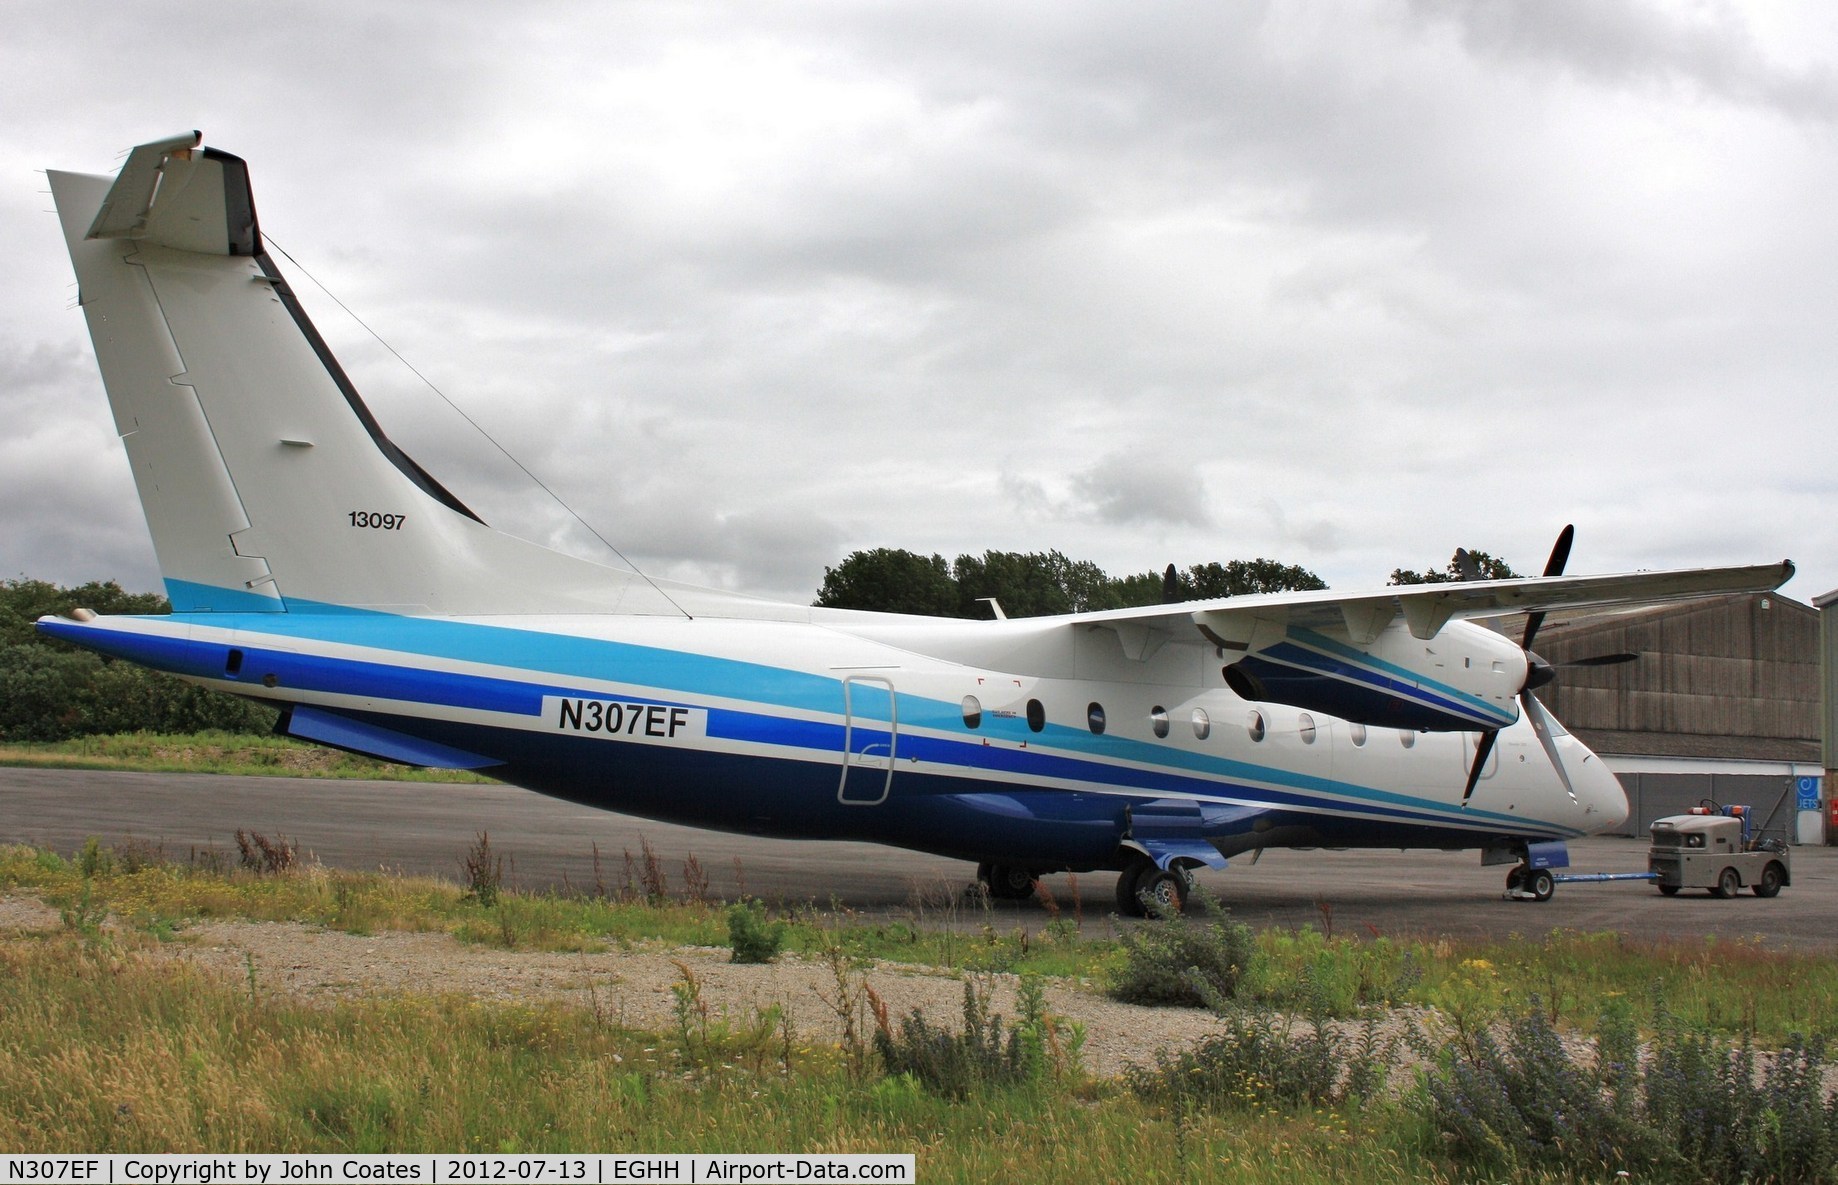 N307EF, 1998 Dornier 328-100 C/N 3097, At JETS with USAF serial 13097 on tail awaiting delivery